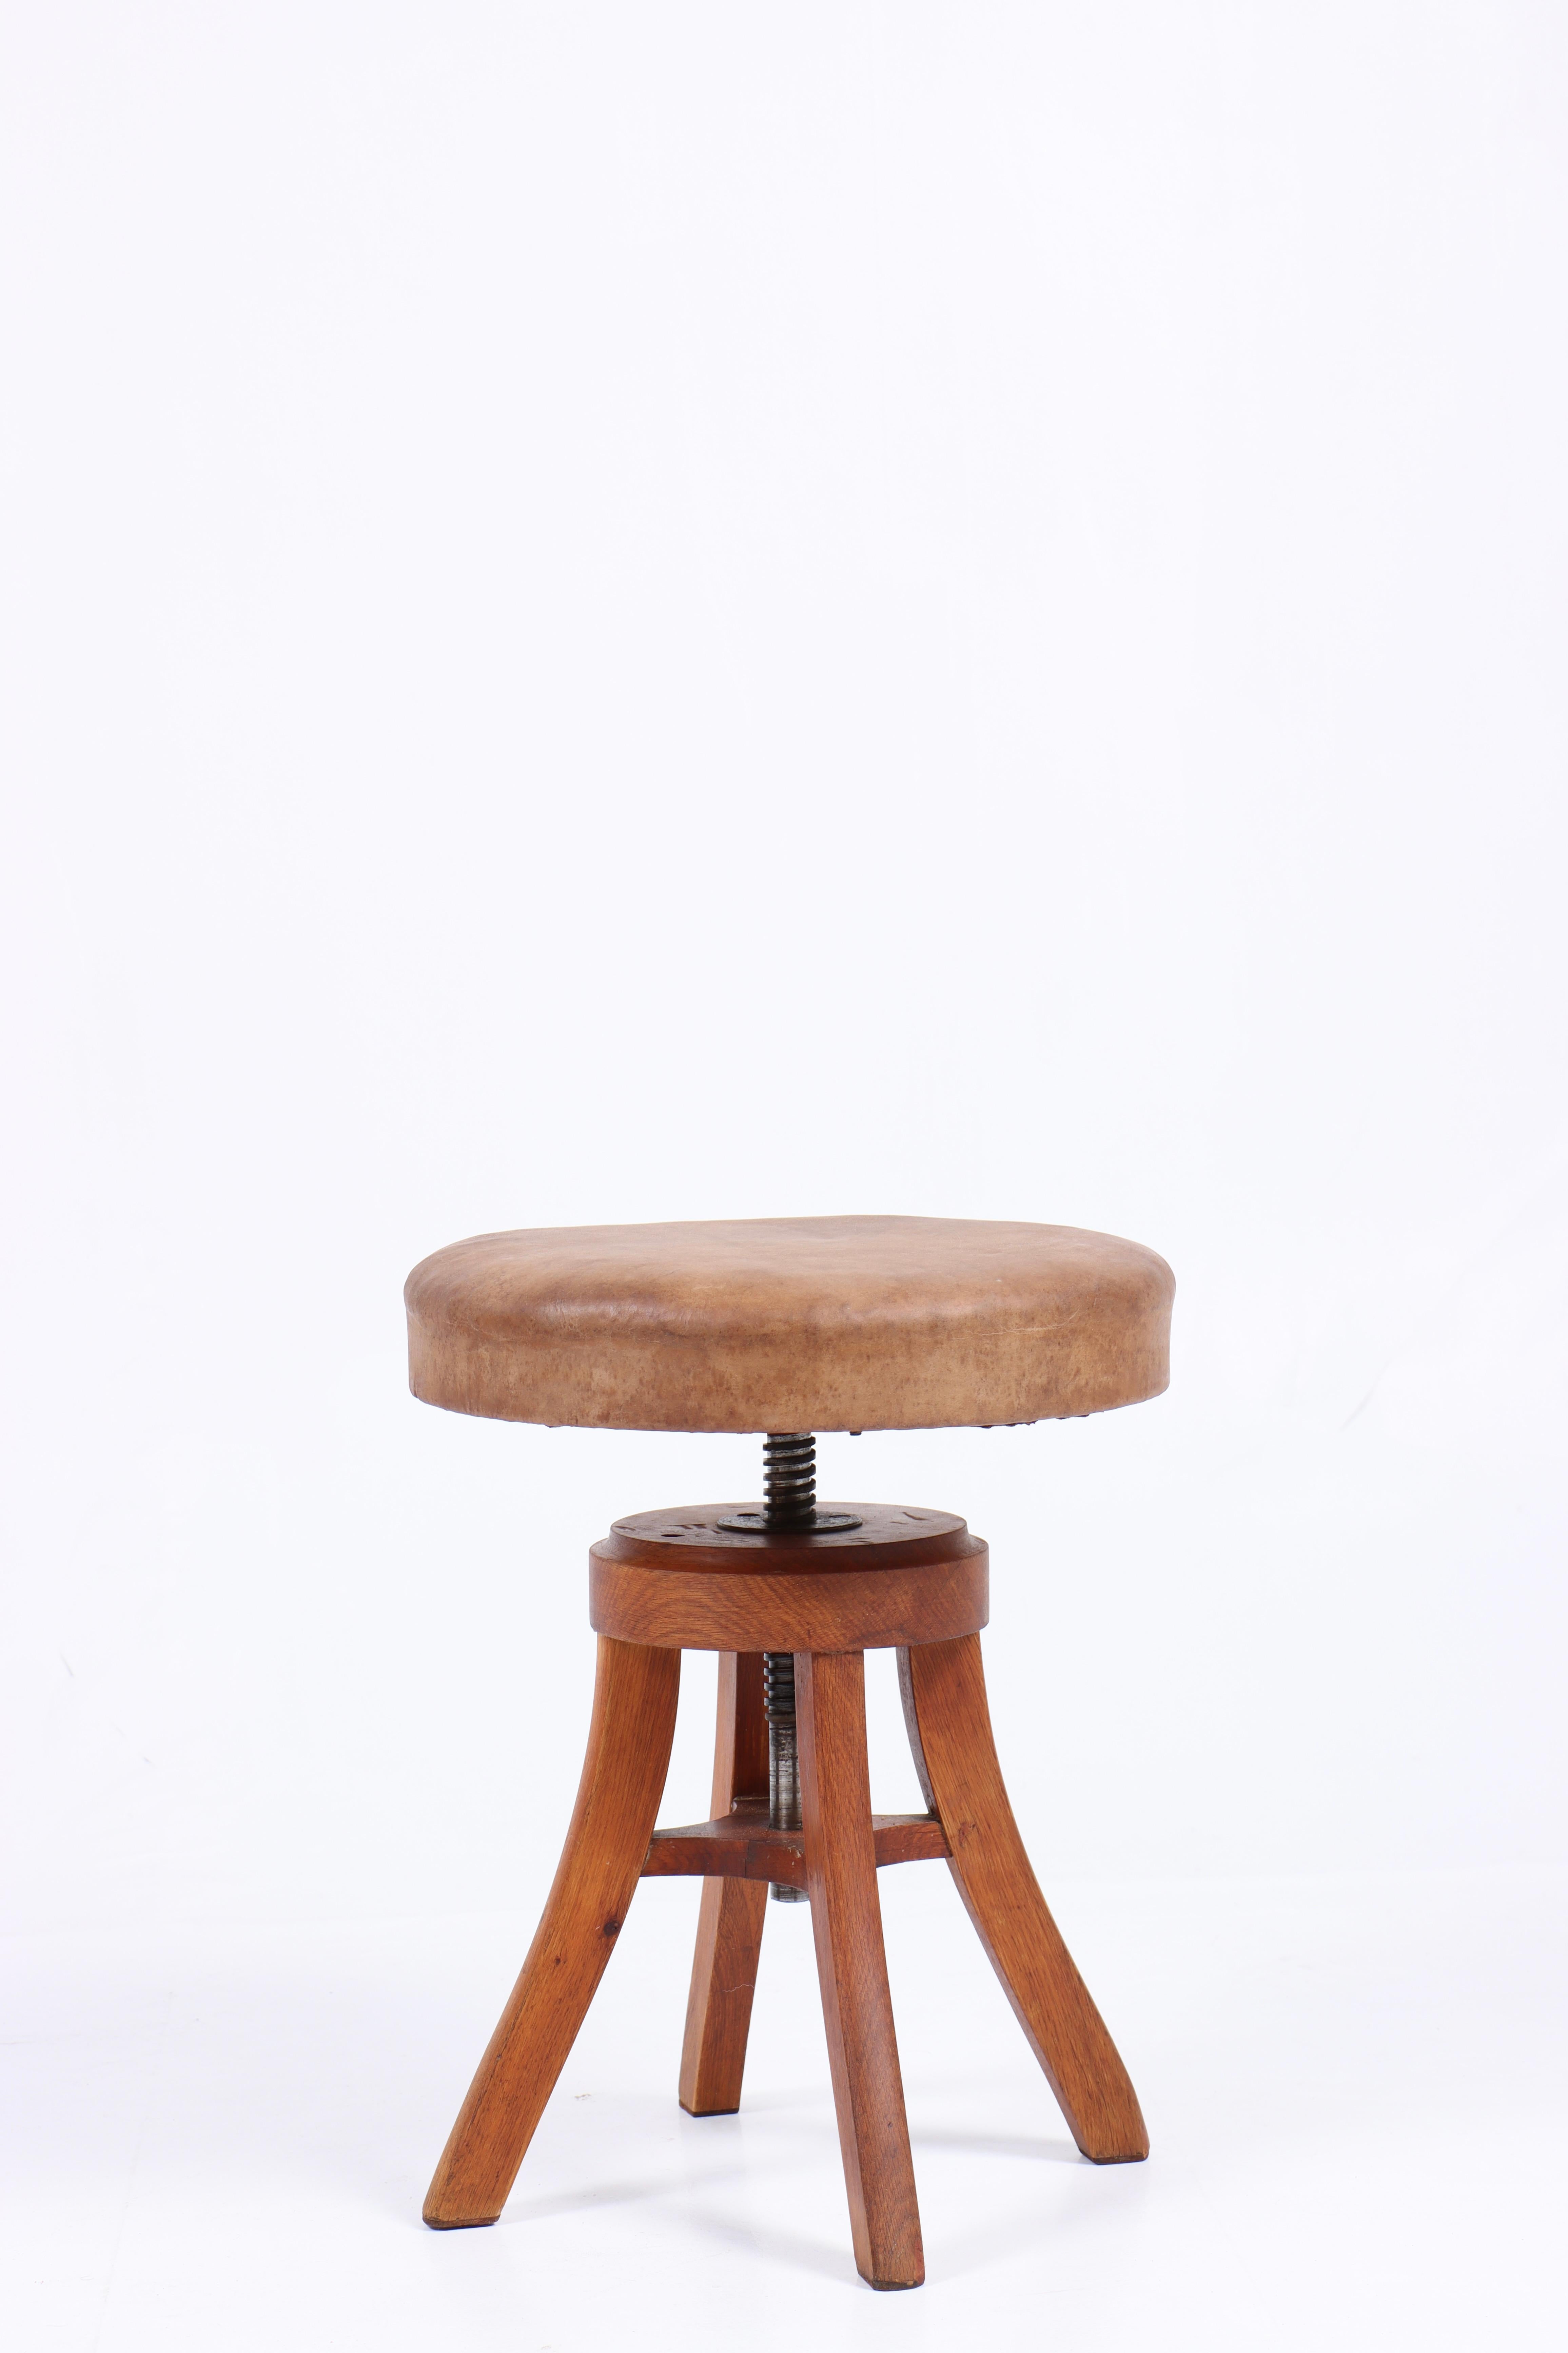 Adjustable Artist Stool in Oak and Patinated Leather, Denmark, 1930s For Sale 1